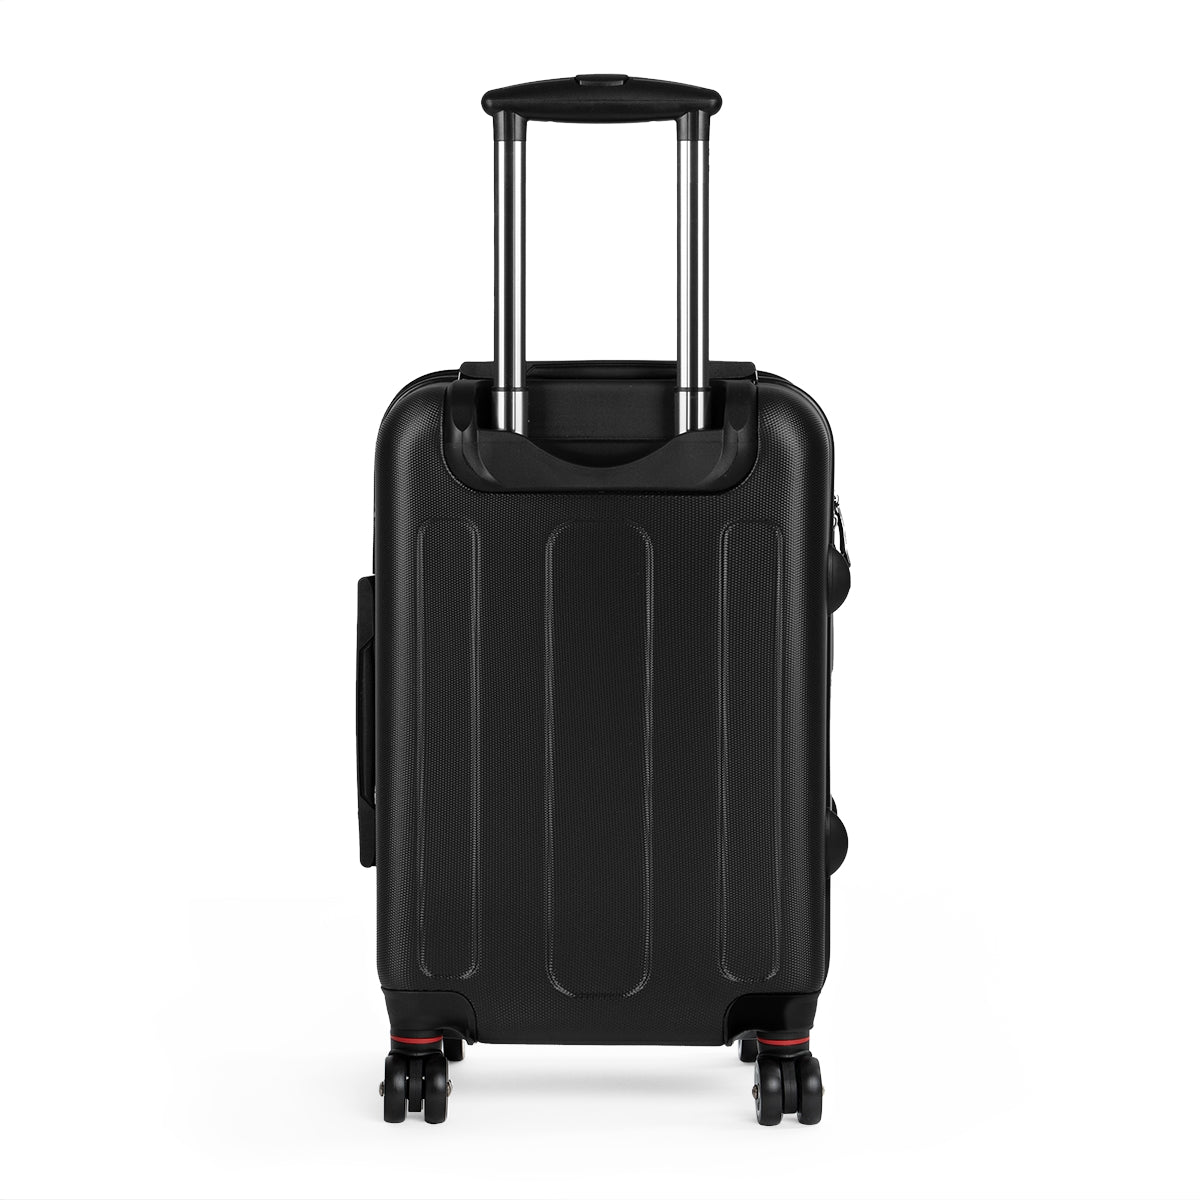 Getrott Nas Illmatic Black Cabin Suitcase Extended Storage Adjustable Telescopic Handle Double wheeled Polycarbonate Hard-shell Built-in Lock Carry-On Travel Check Luggage 4-Wheel Spinner Suitcase Bag Multiple Colors and Sizes-Bags-Geotrott